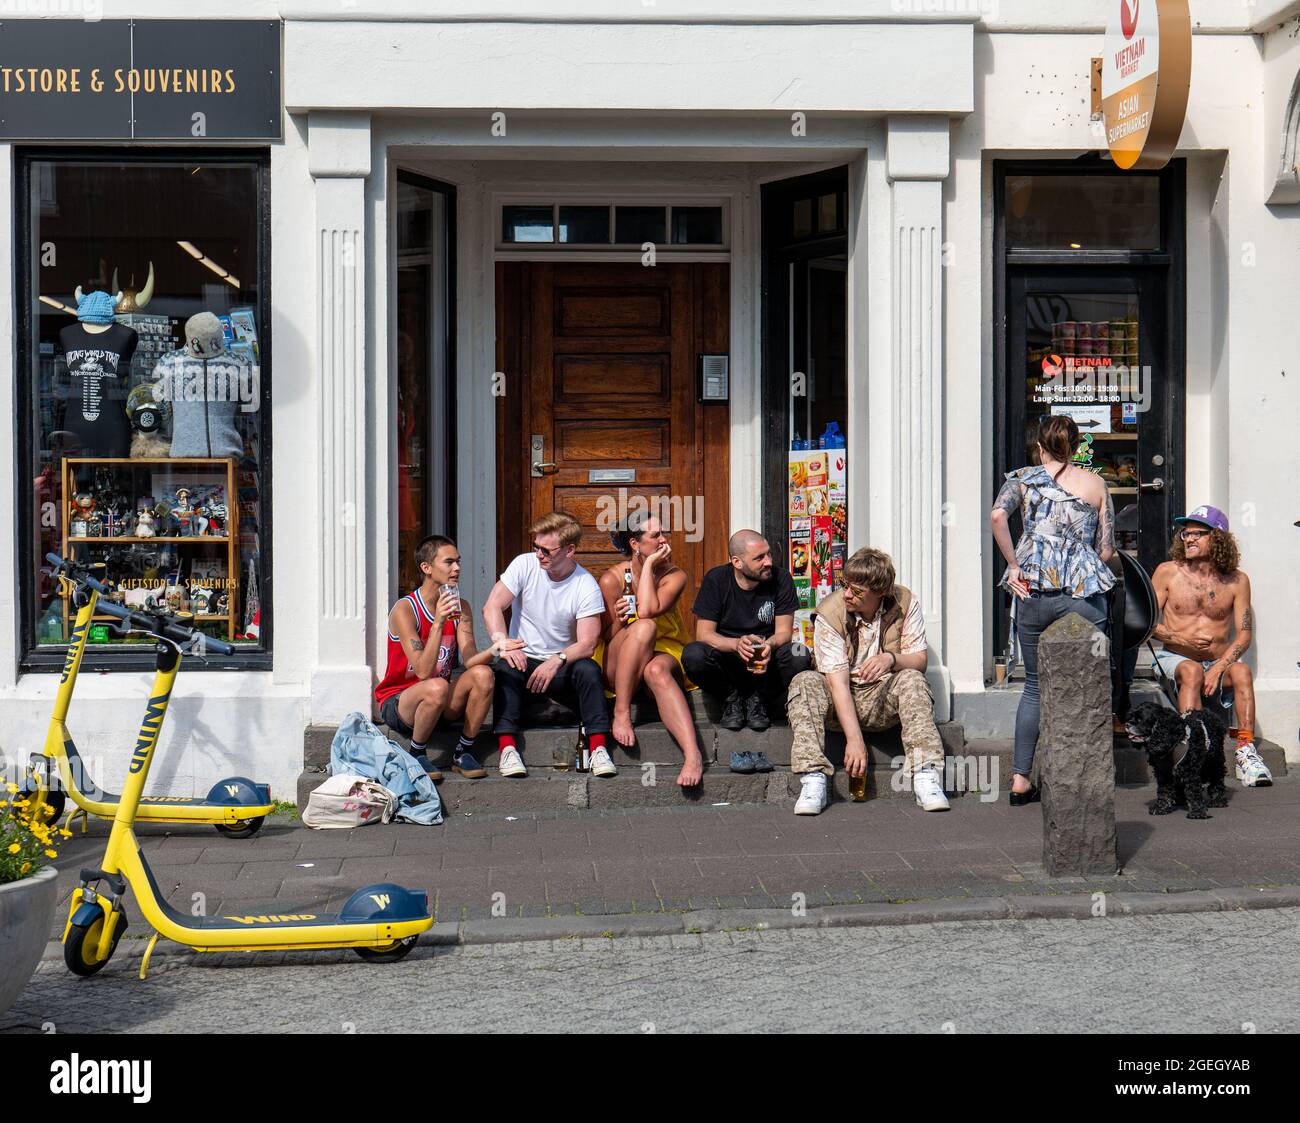 Hipster Hangout, group of friends hanging out in front of a store in Reykjavik, Iceland Stock Photo